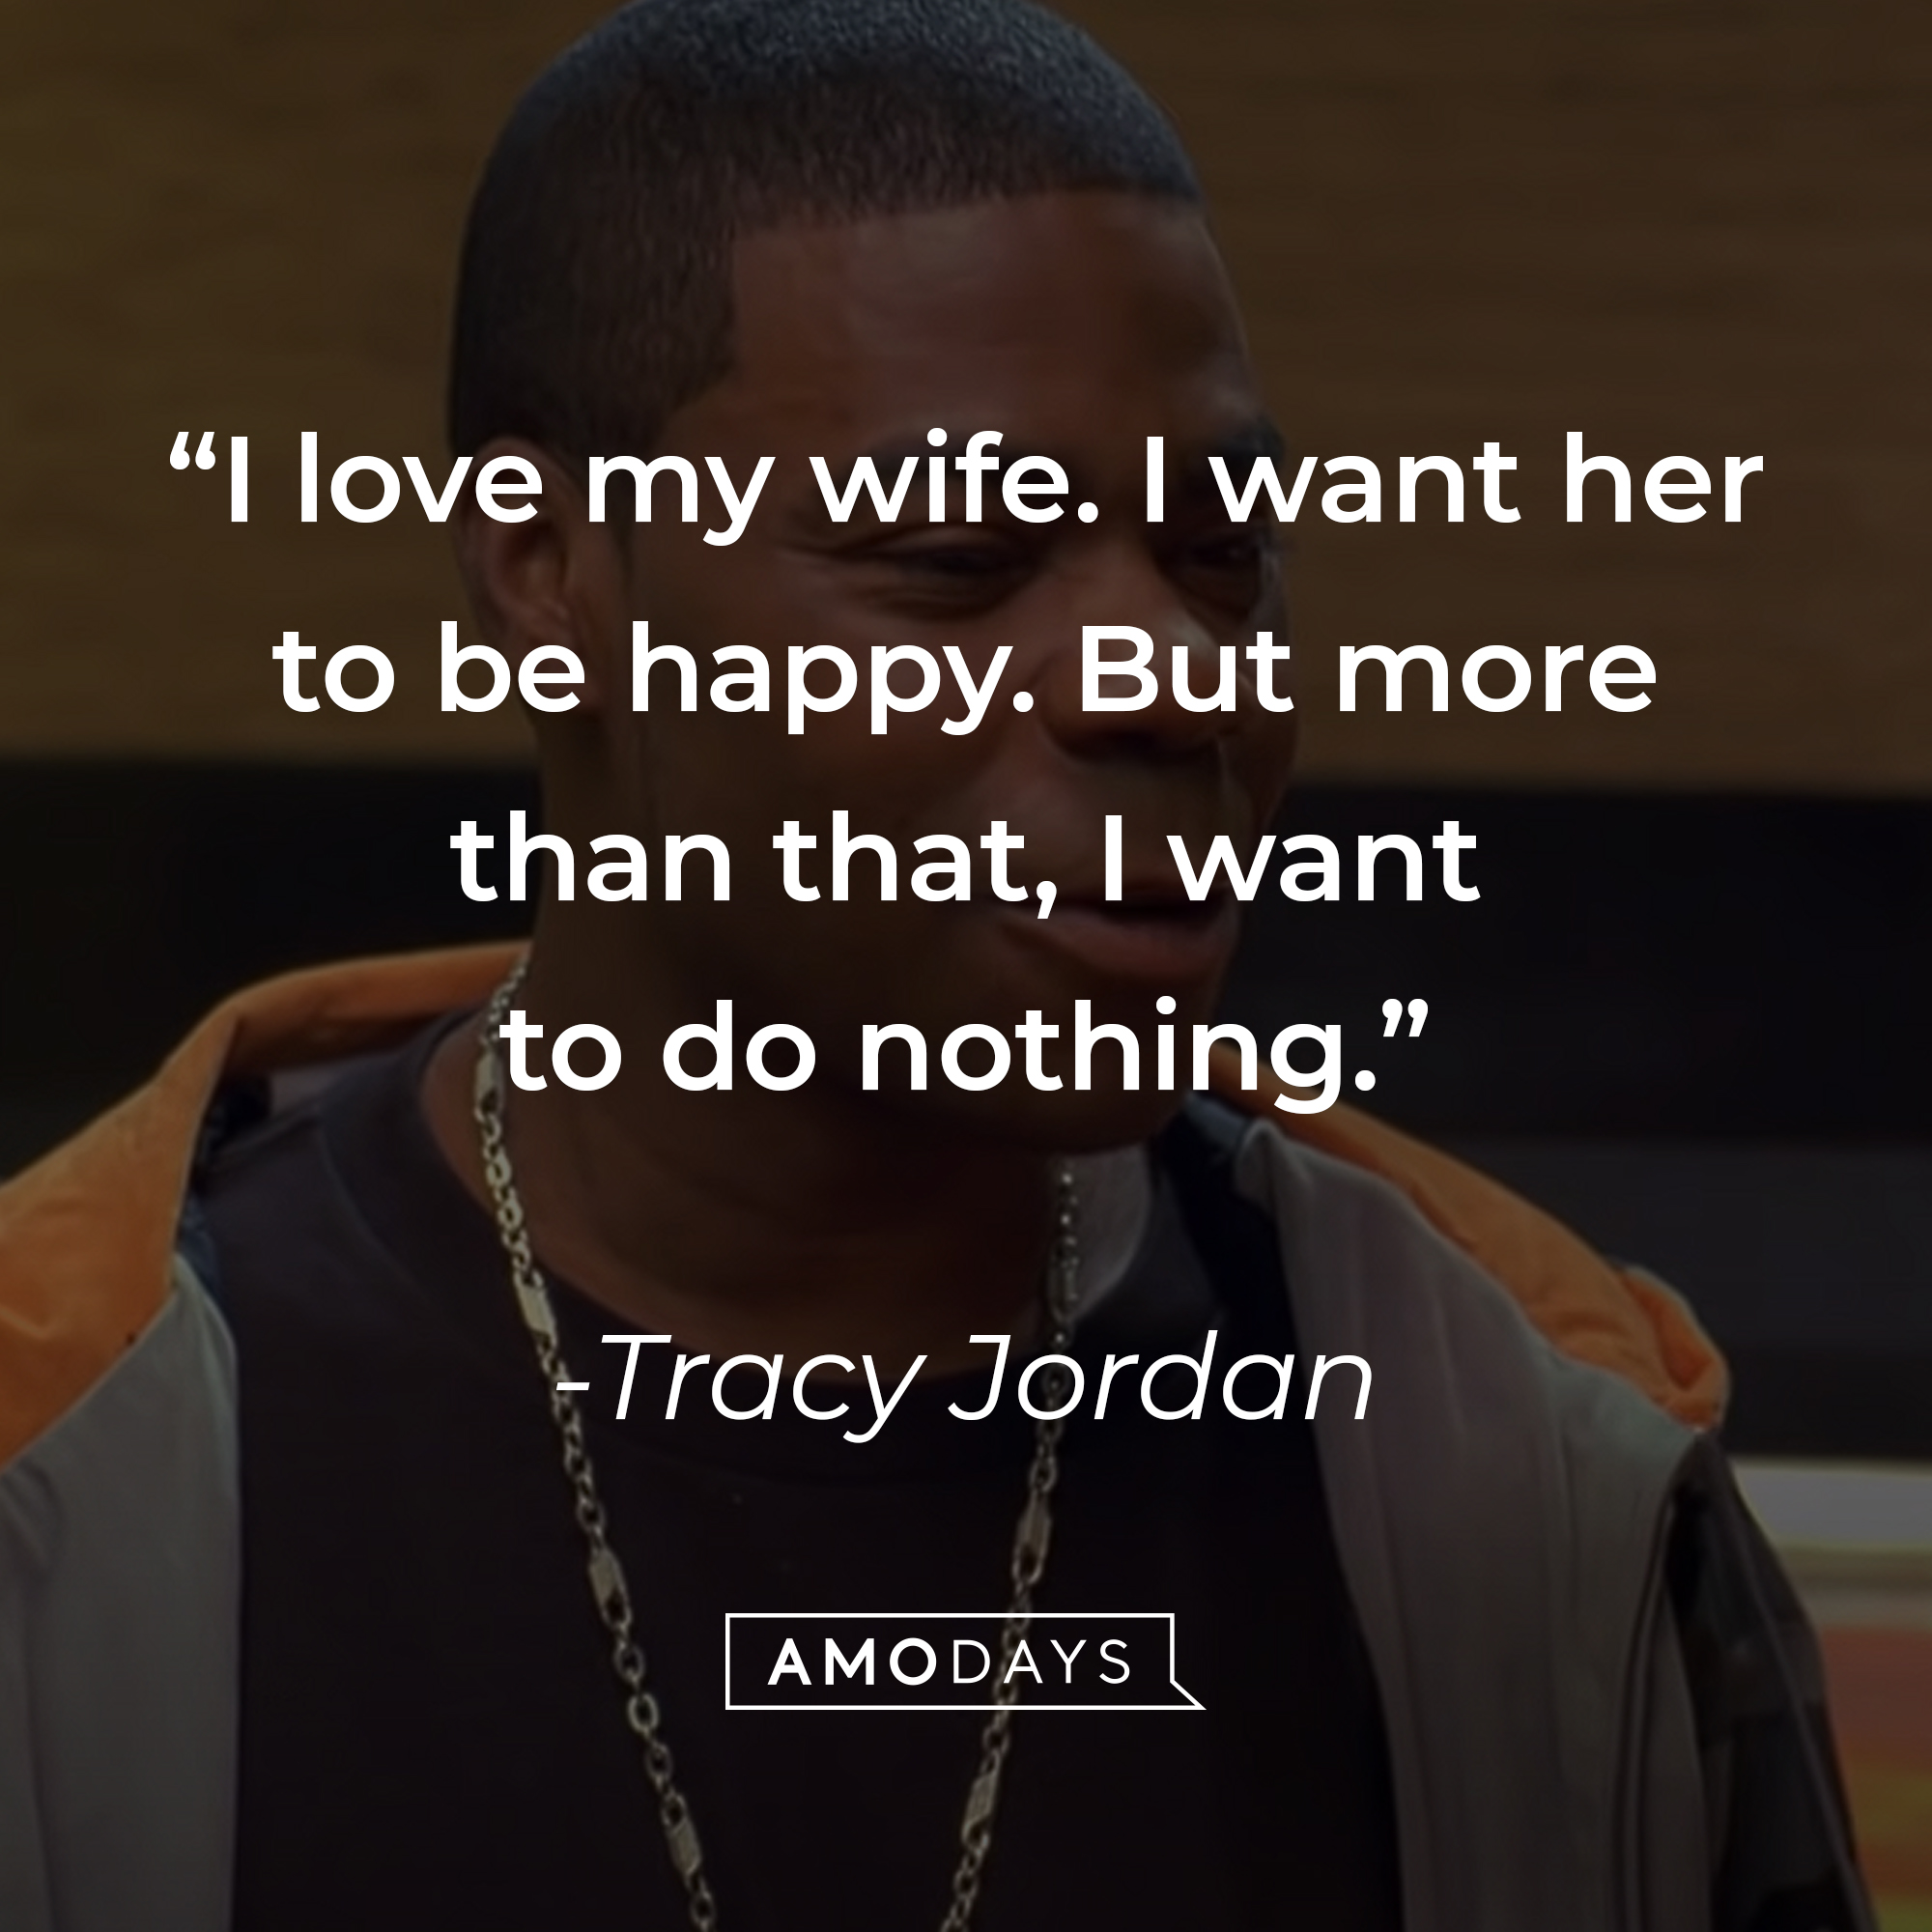 Tracy Jordan's quote, "I love my wife. I want her to be happy. But more than that, I want to do nothing." | Source: facebook.com/30RockTV